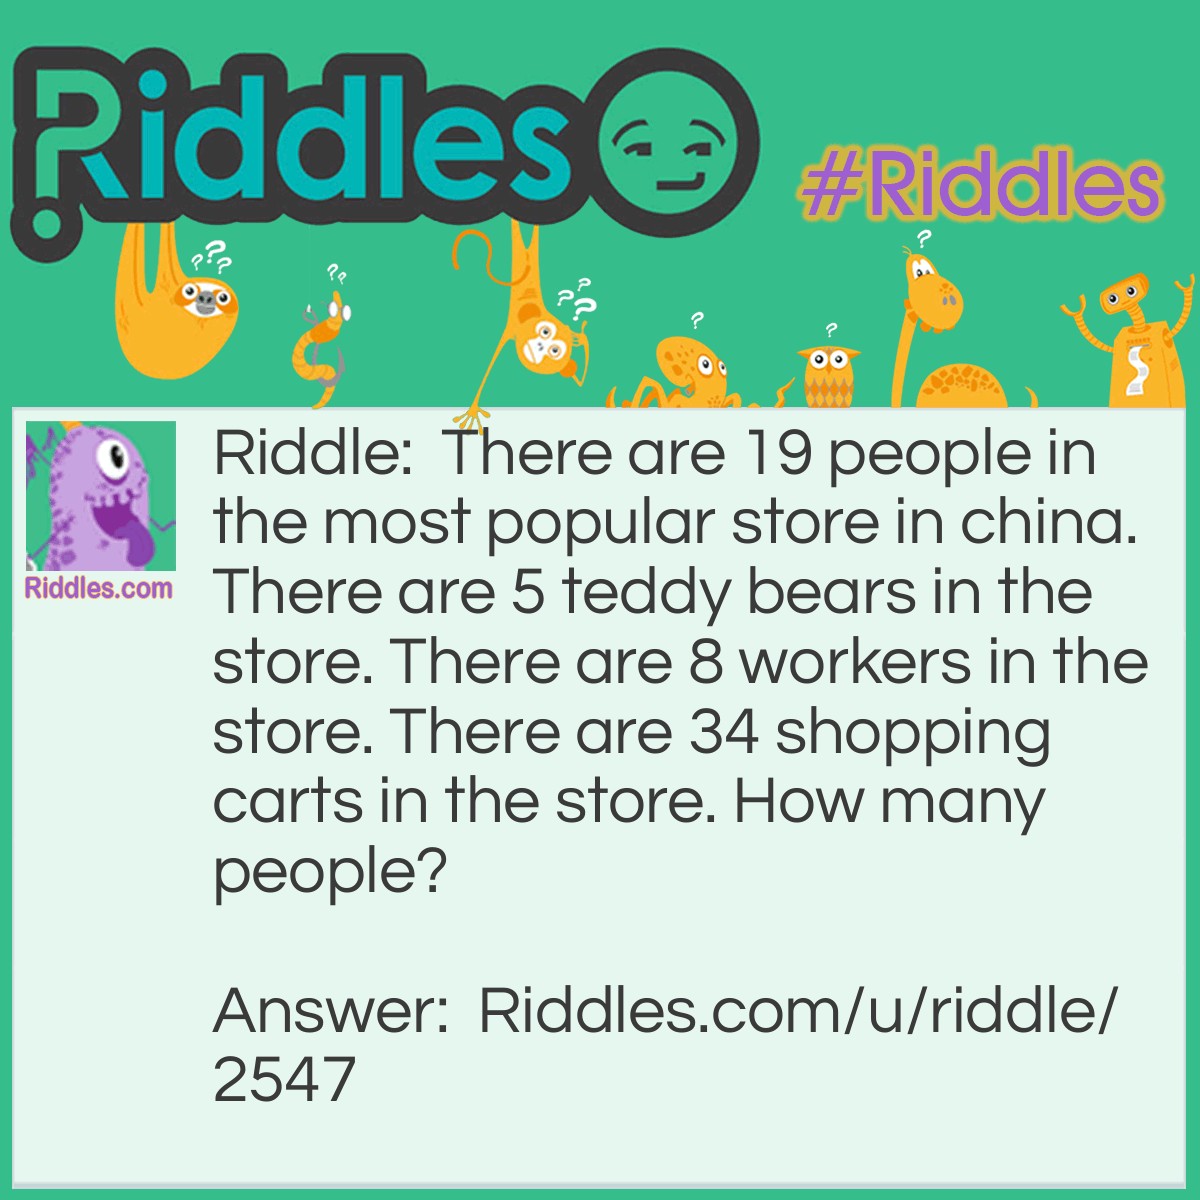 Riddle: There are 19 people in the most popular store in china. There are 5 teddy bears in the store. There are 8 workers in the store. There are 34 shopping carts in the store. How many people? Answer: No one can calculate how many people in china EXACTLY..duuuuh.